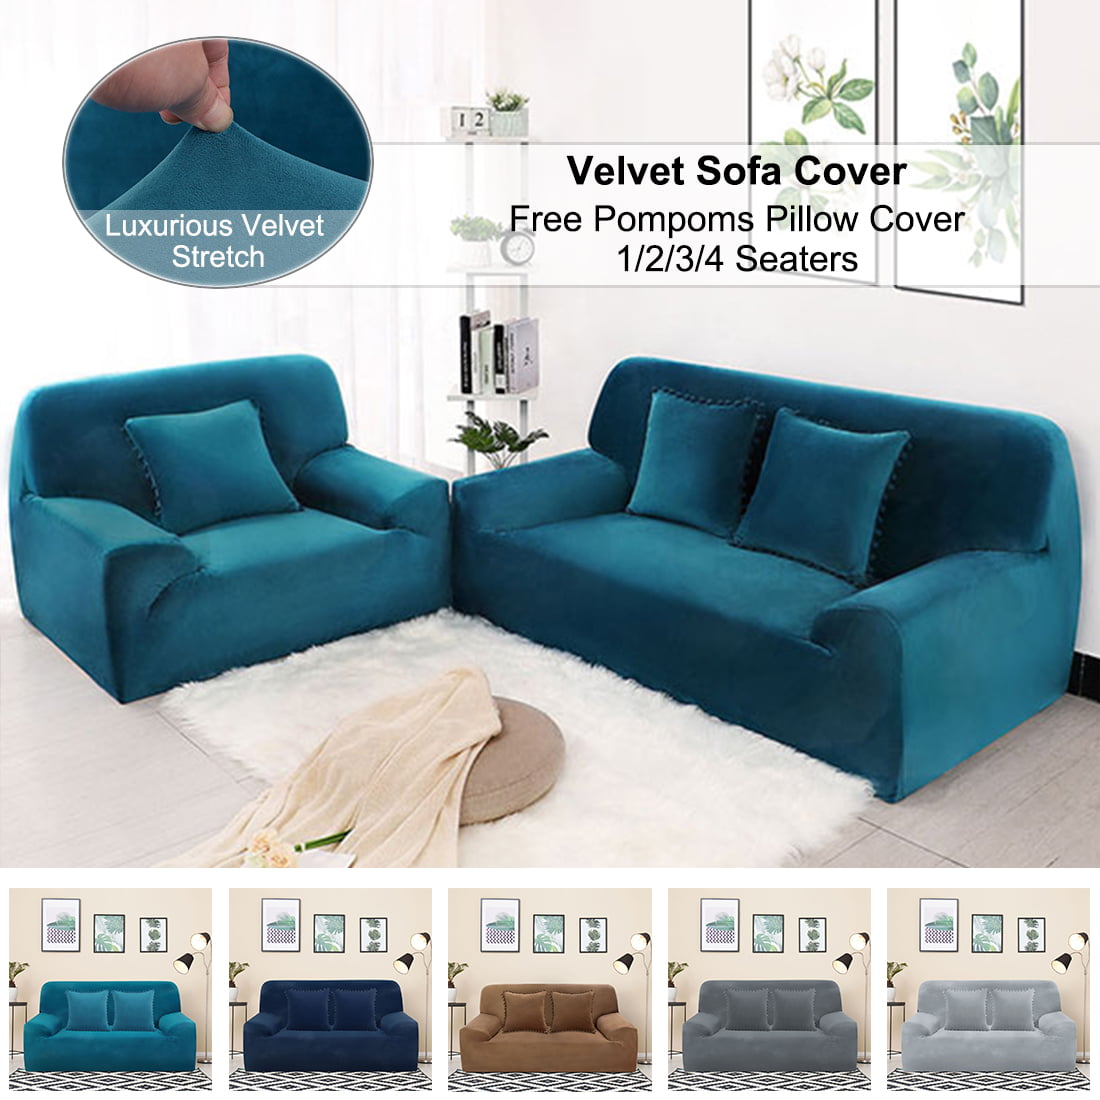 STRETCH FORM FIT-3Pcs Slipcovers Set,Couch/Sofa+Loveseat+Chair Covers-NAVY BLUE 